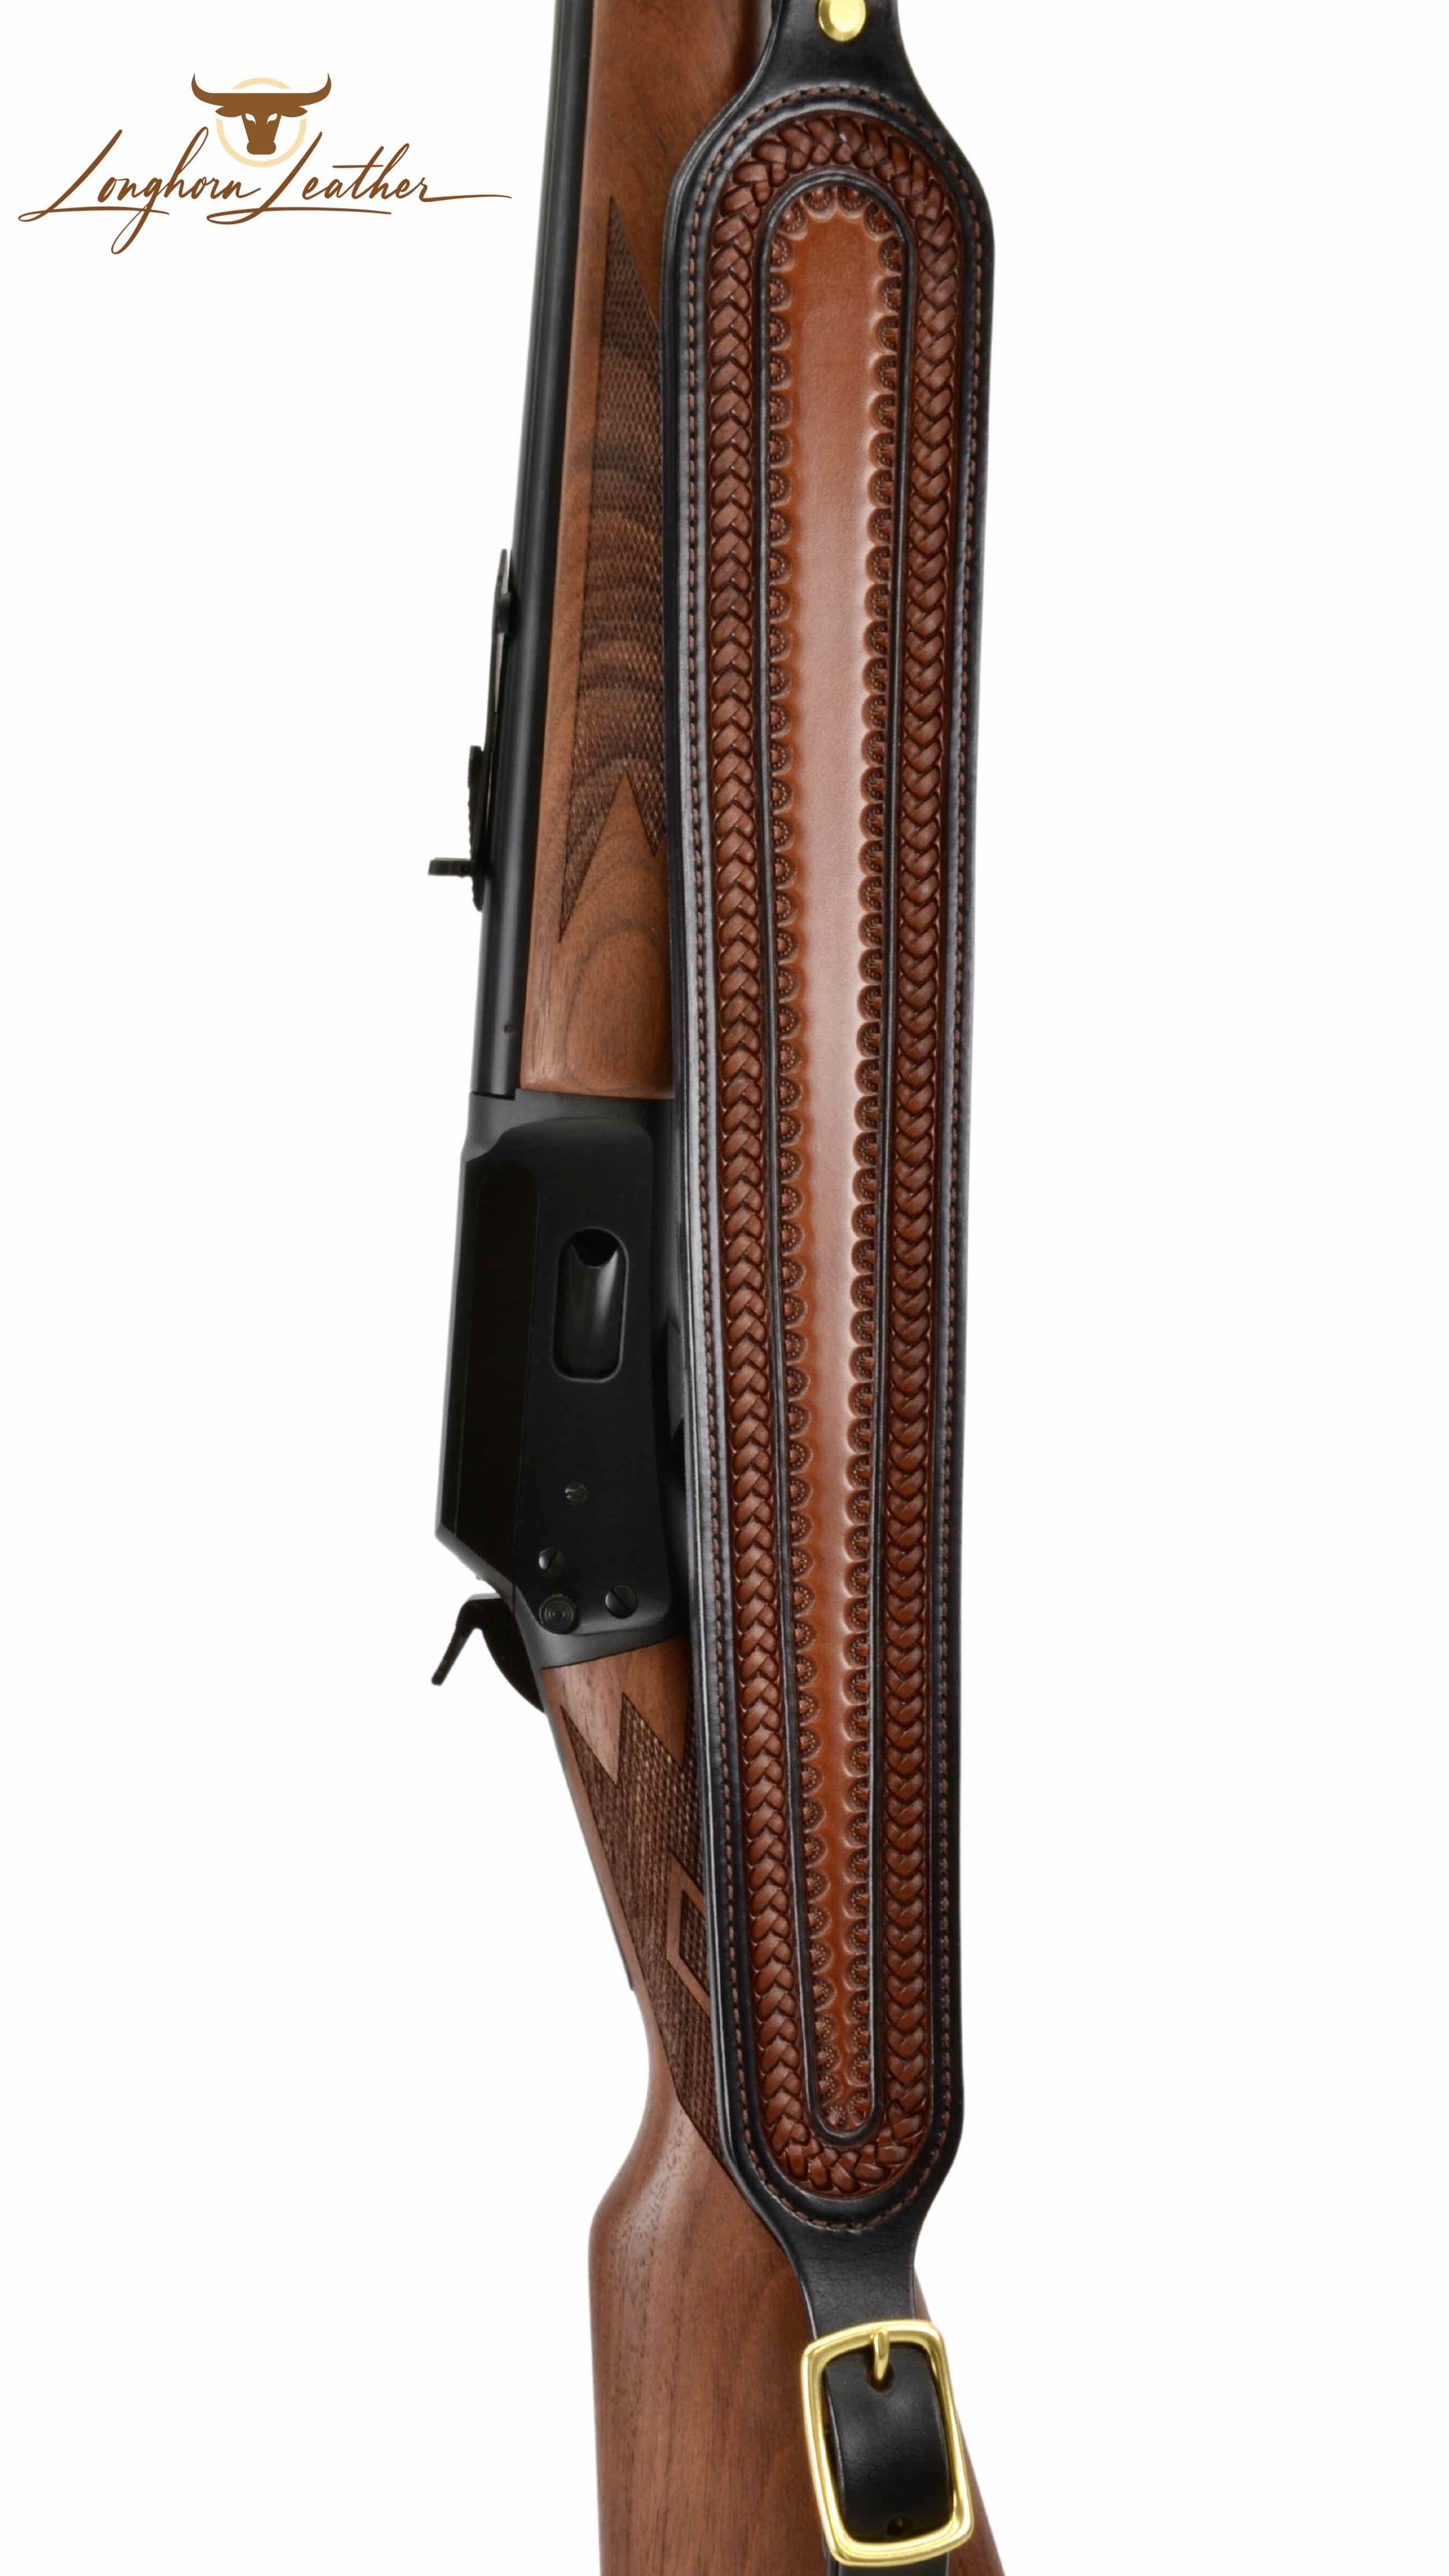 Custom leather rifle sling featuring the Sedona design.  Individually handcrafted at Longhorn Leather AZ